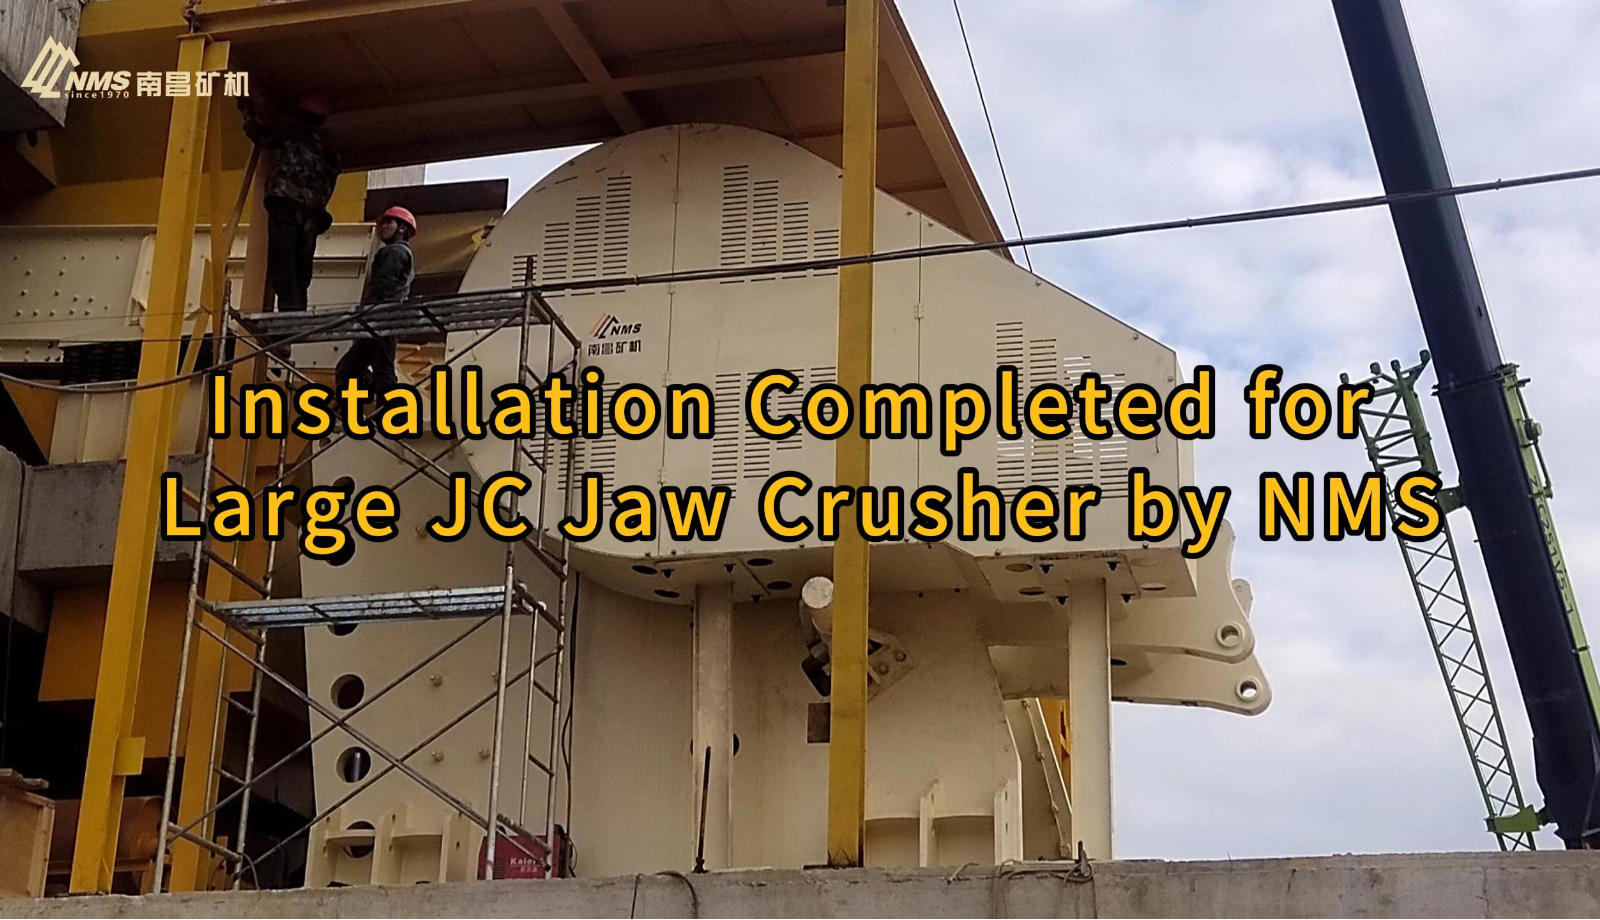 Installation Completed for Large JC Jaw Crusher by NMS